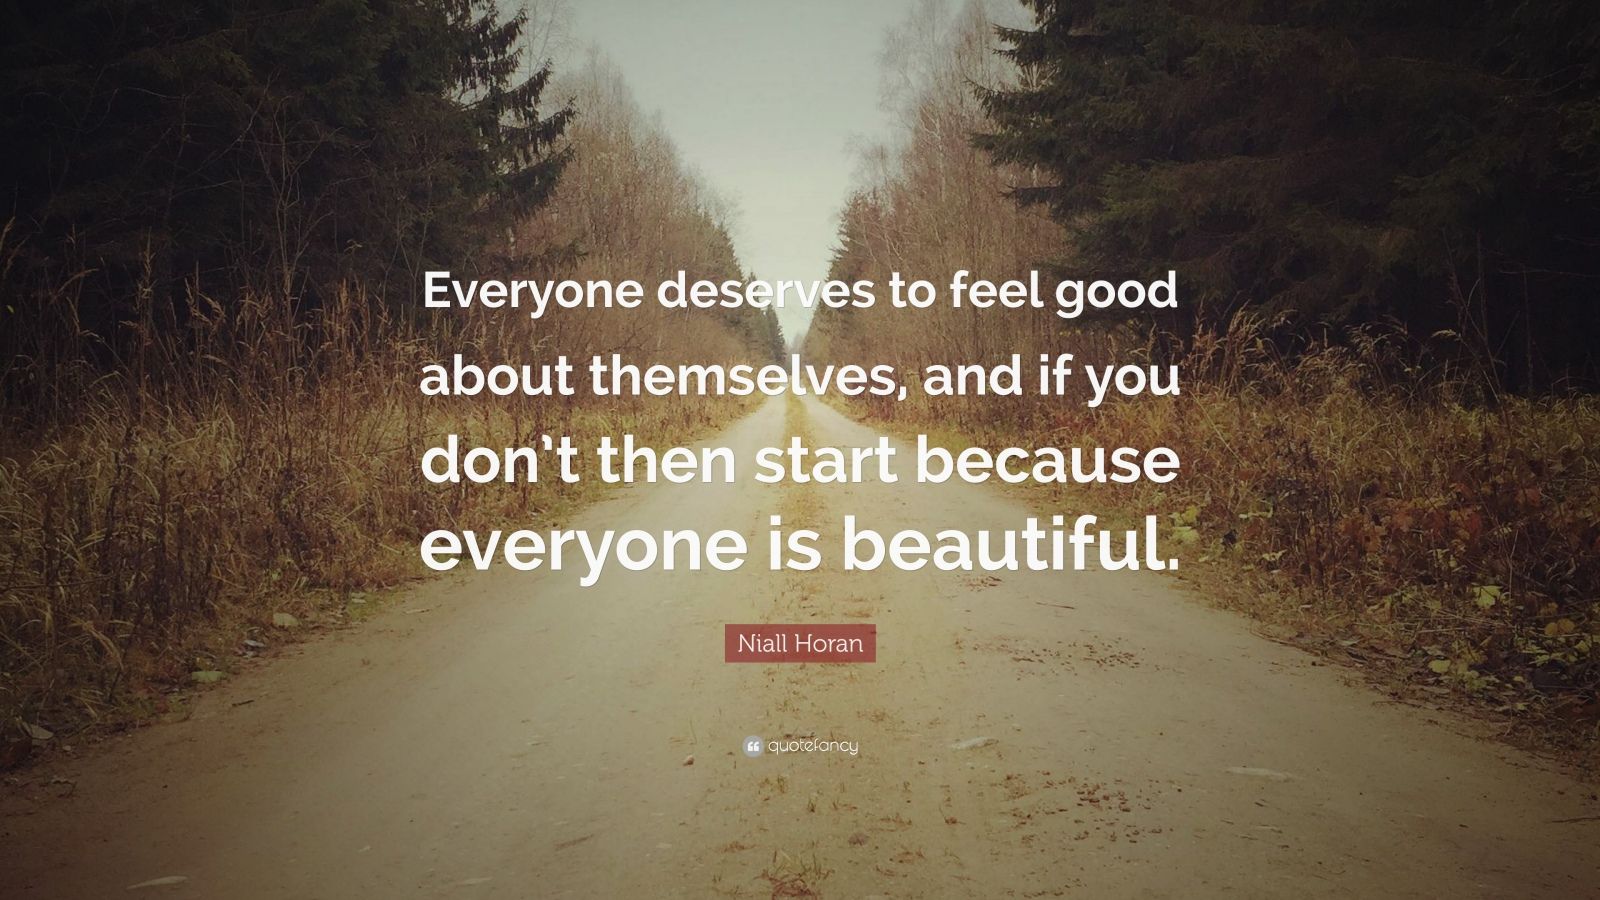 Niall Horan Quote: “Everyone deserves to feel good about themselves